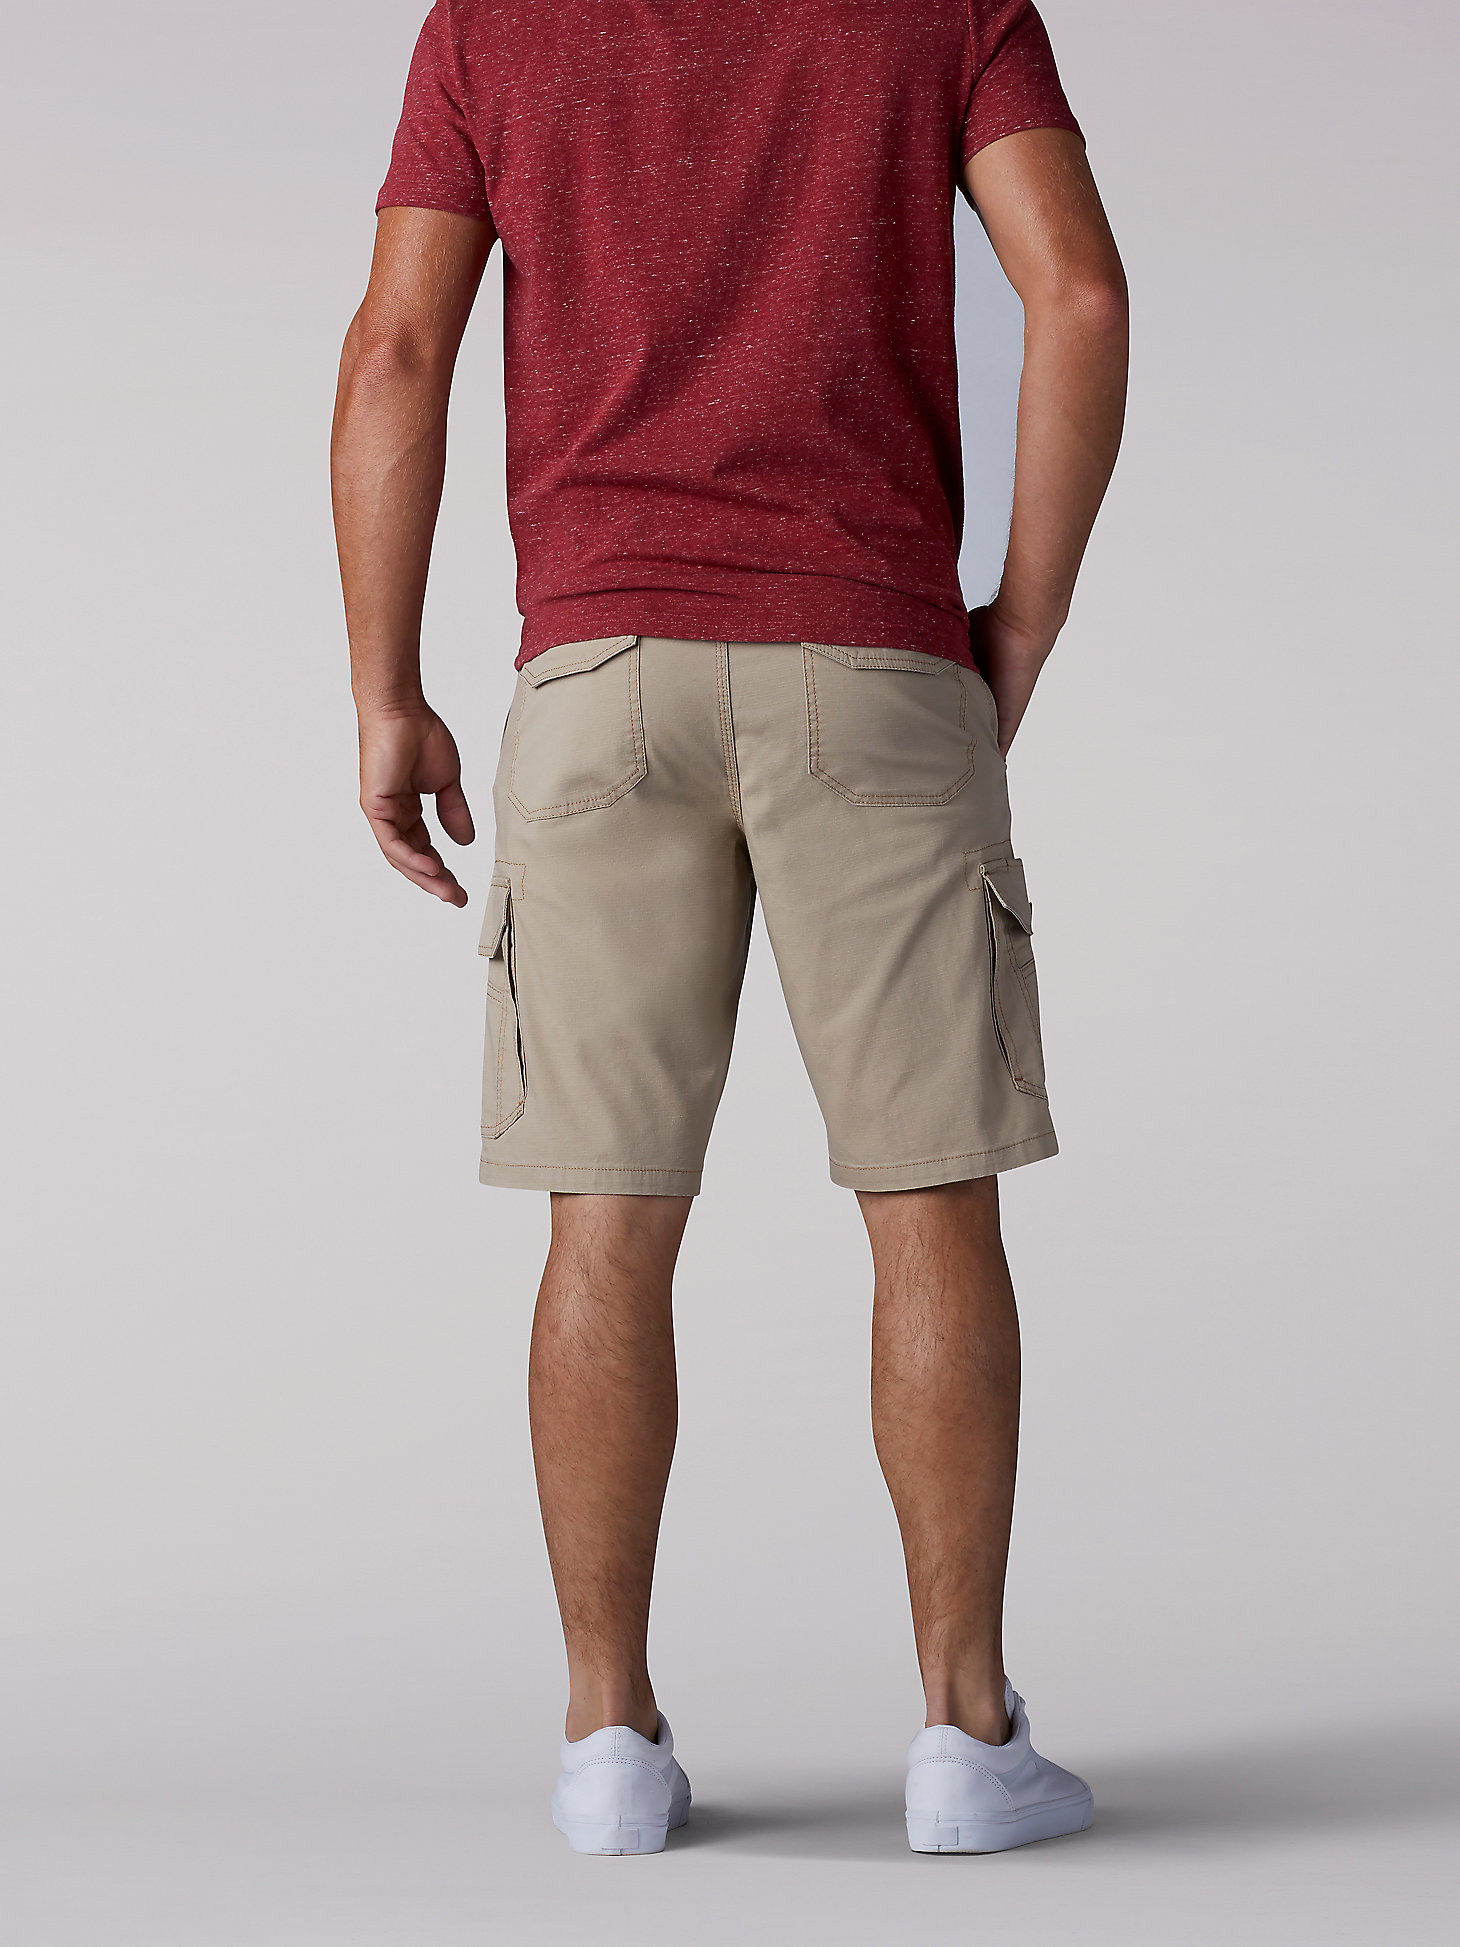 LEE Mens Big & Tall Extreme Motion Swope Cargo Short